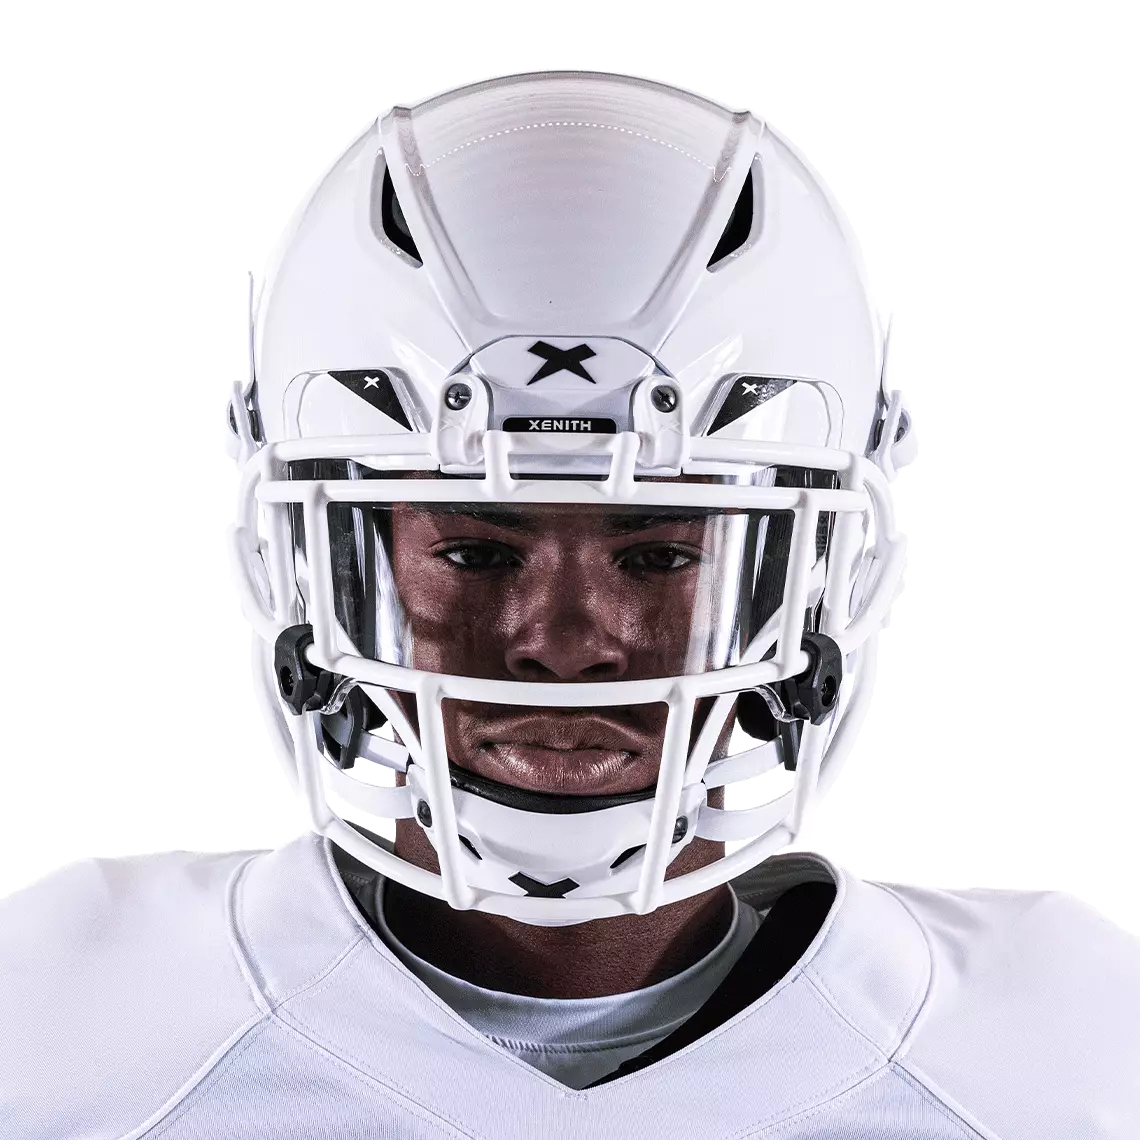 Front facing view of a player wearing a Xenith Visor.